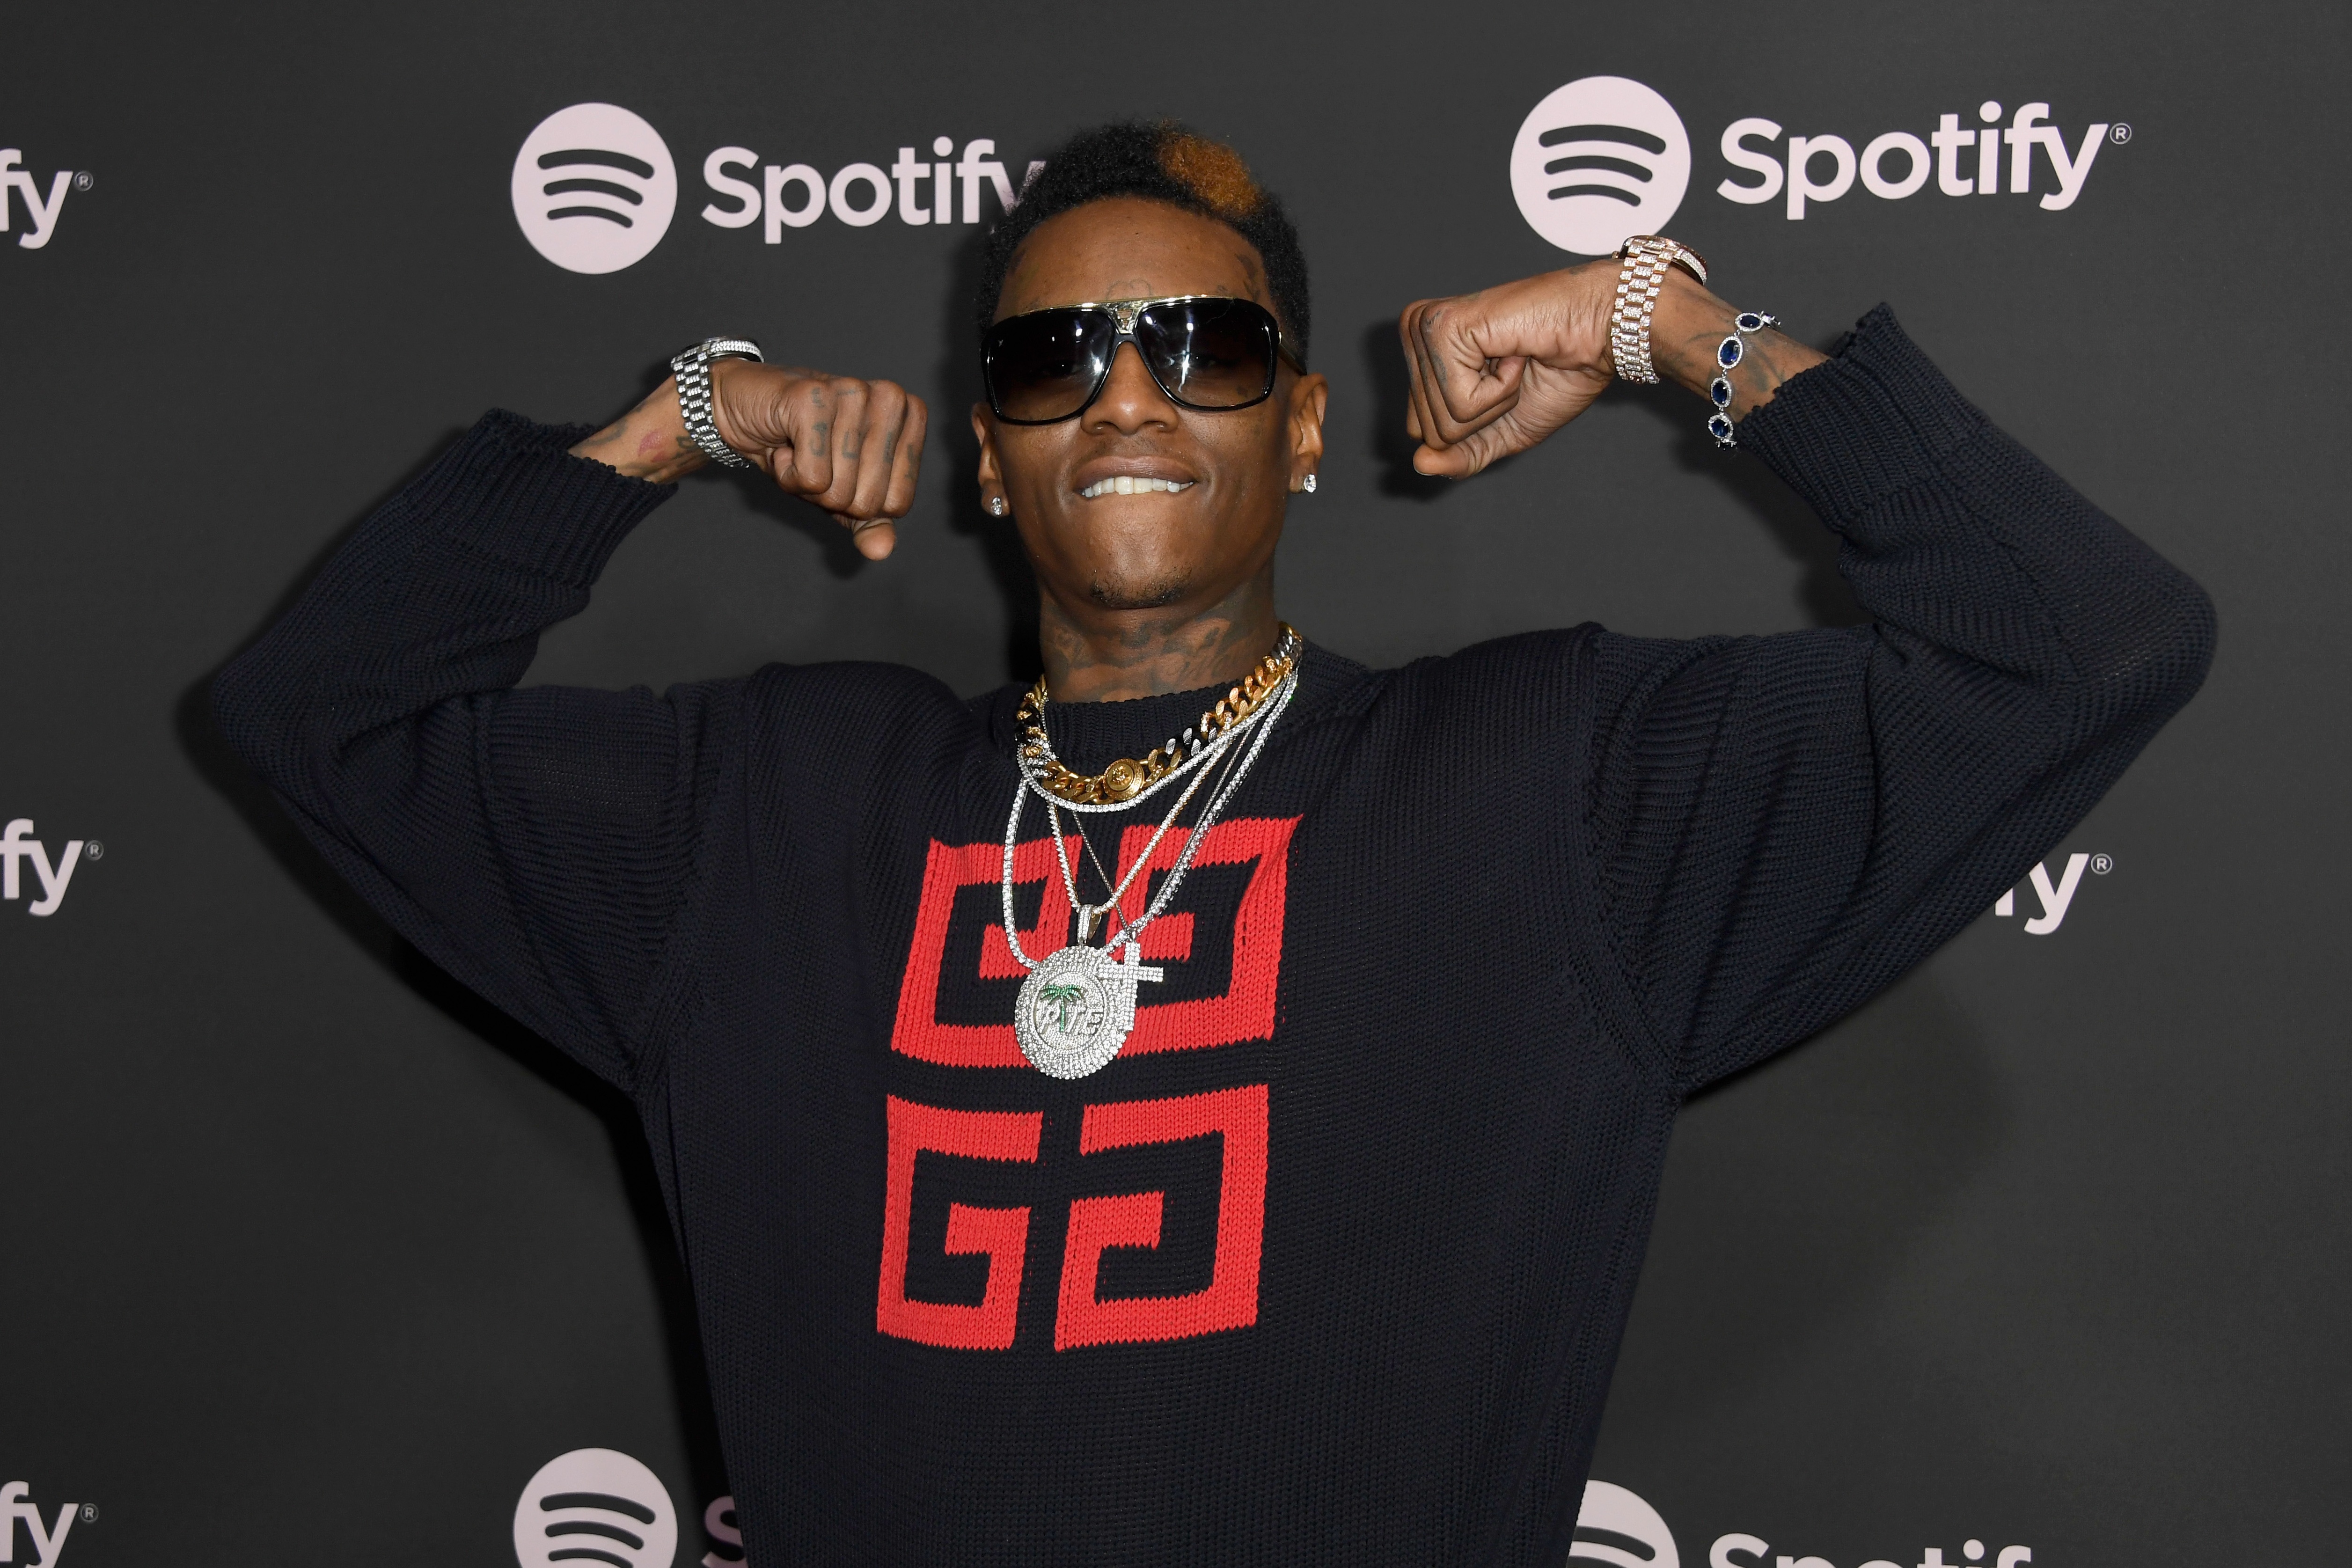 Soulja Boy Arrested After Police Search Home for Evidence of Kidnapping: Report